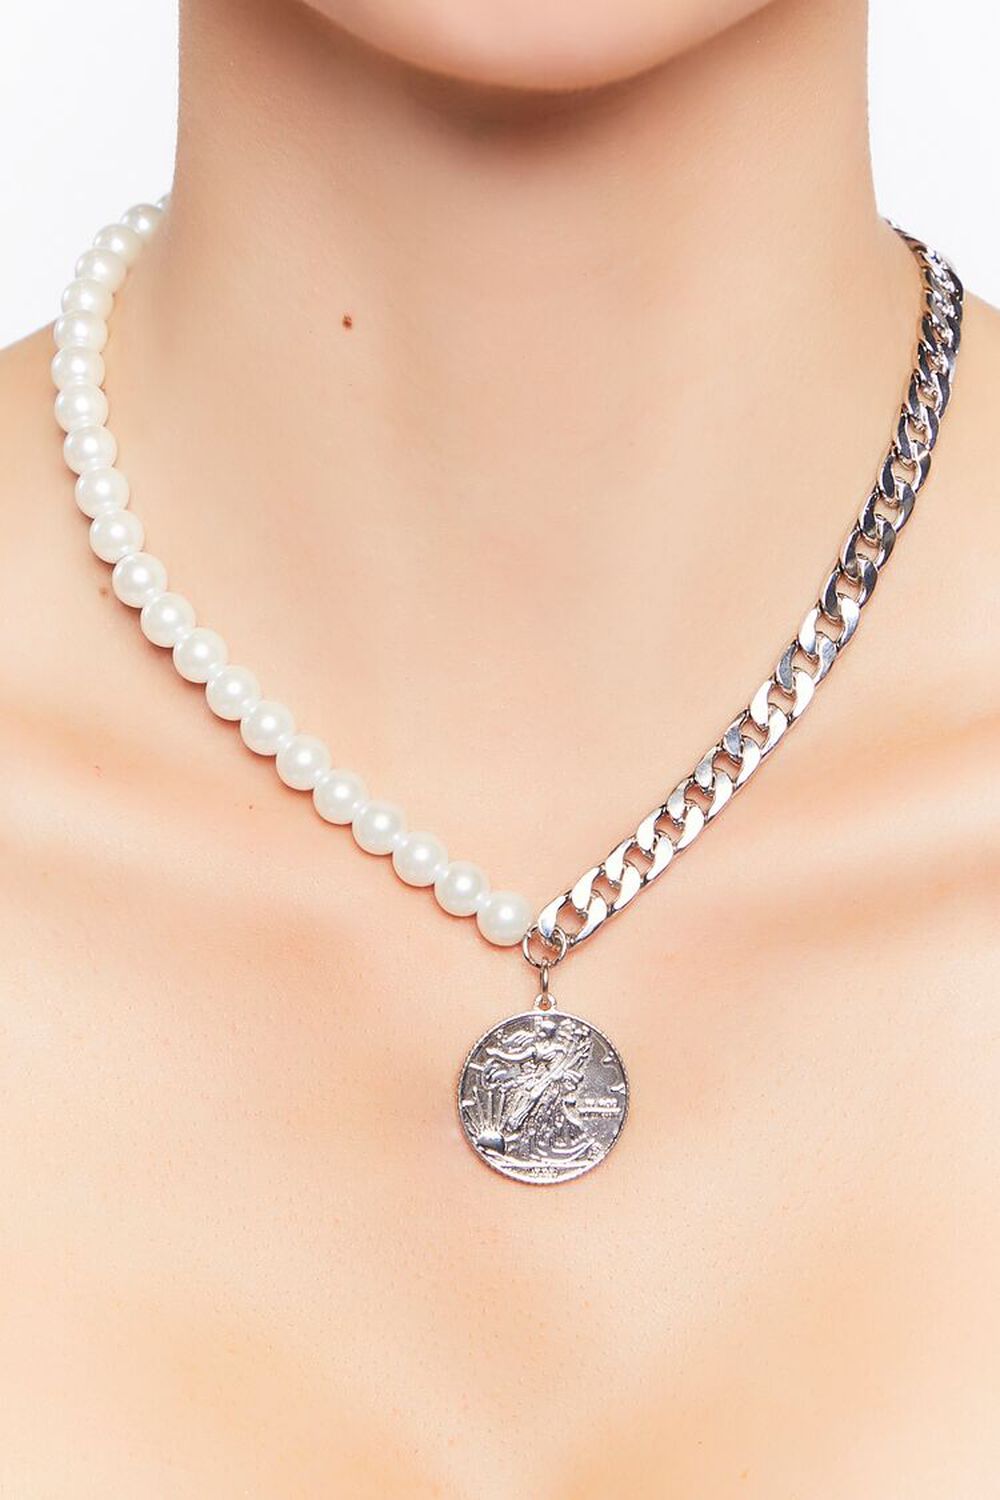 Reworked Faux Pearl Coin Necklace, image 1